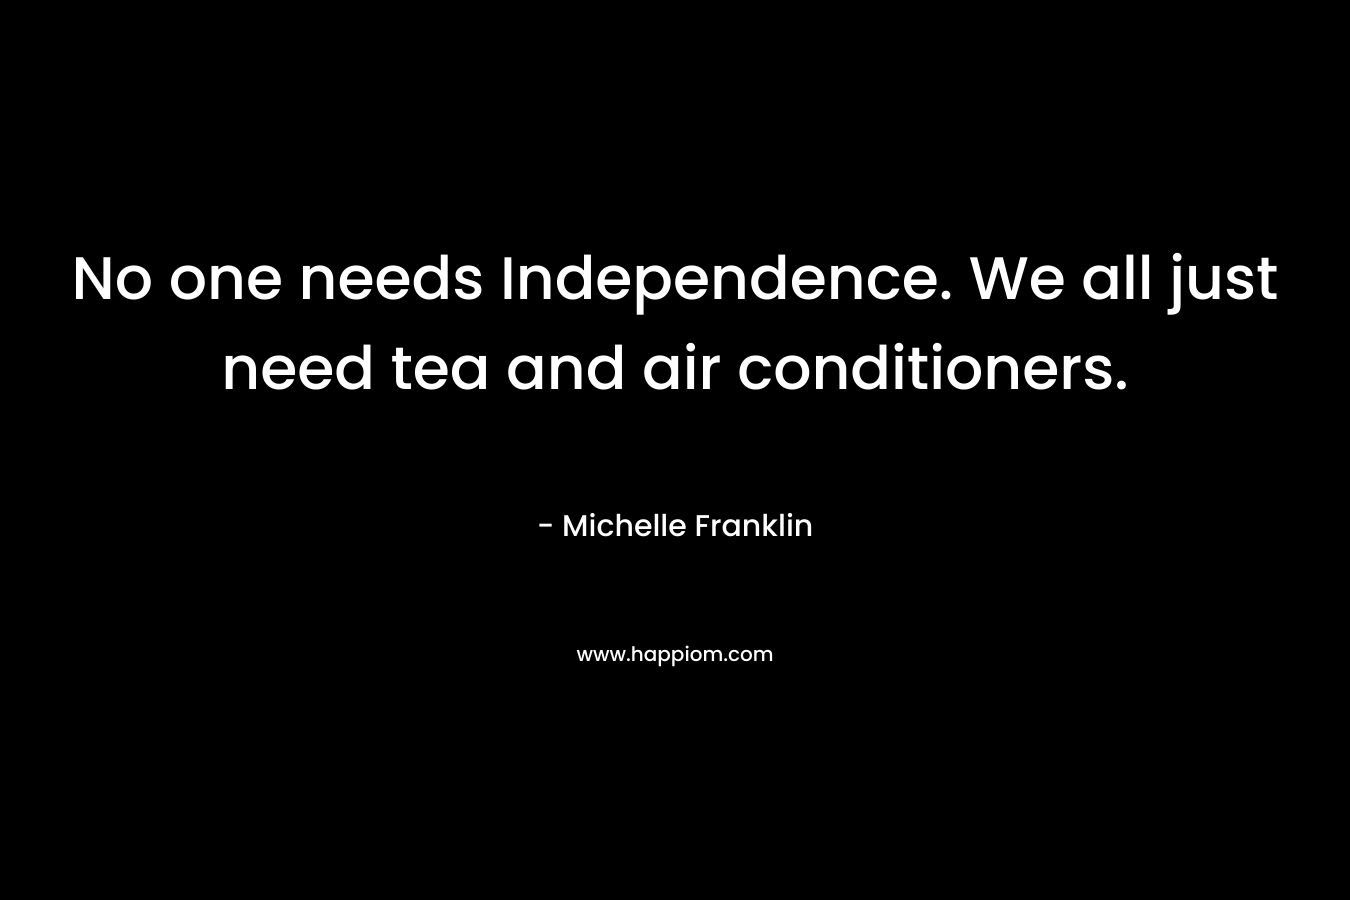 No one needs Independence. We all just need tea and air conditioners.